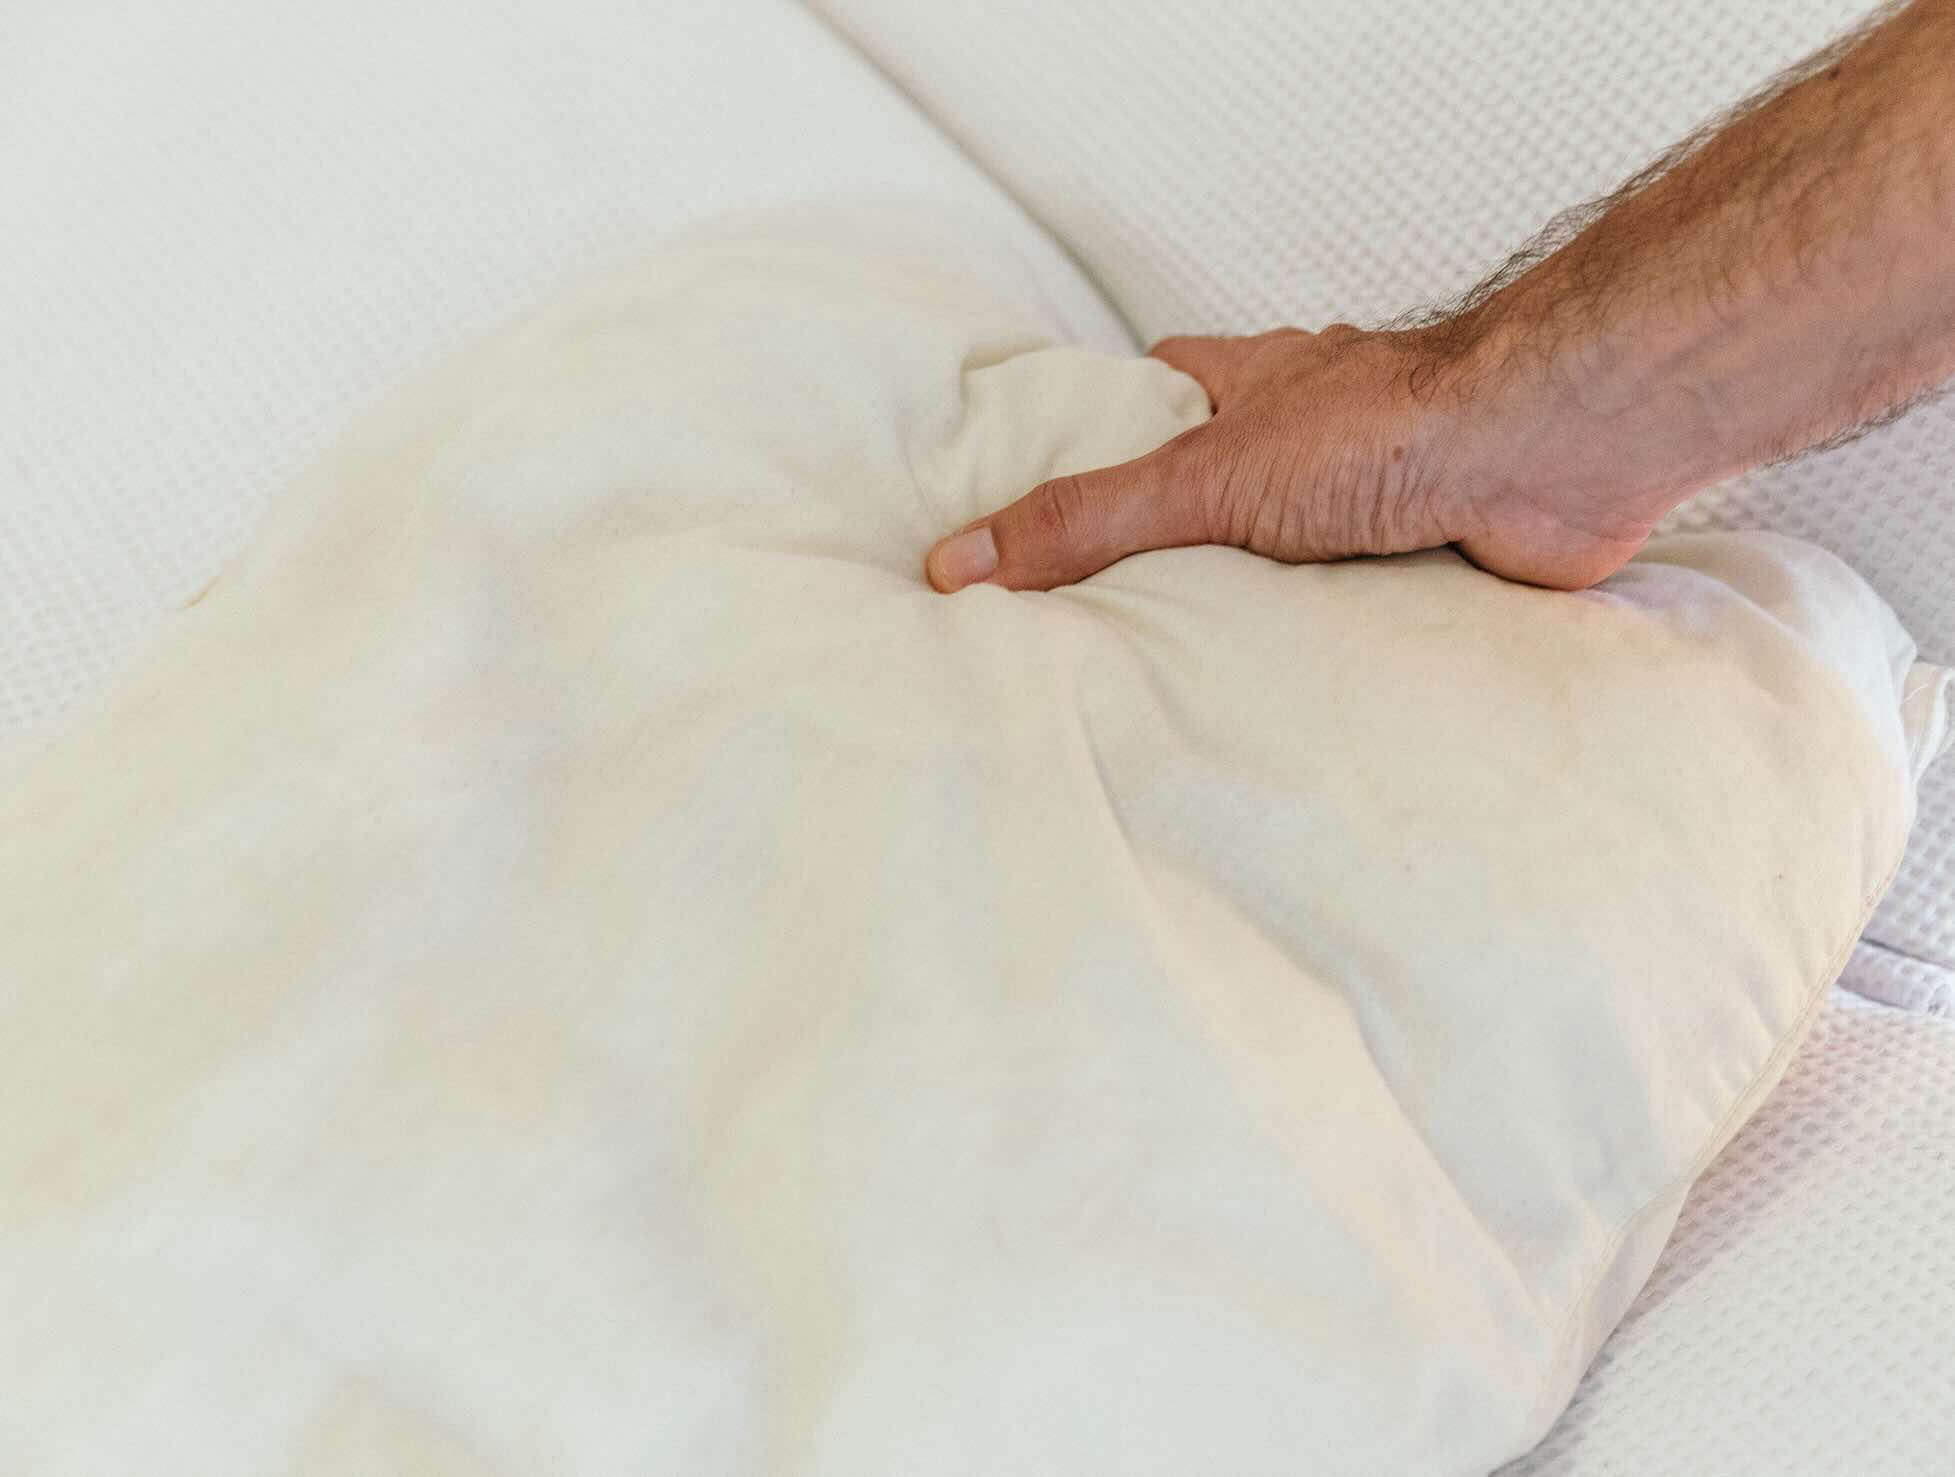 How To Wash Pillows With Baking Soda